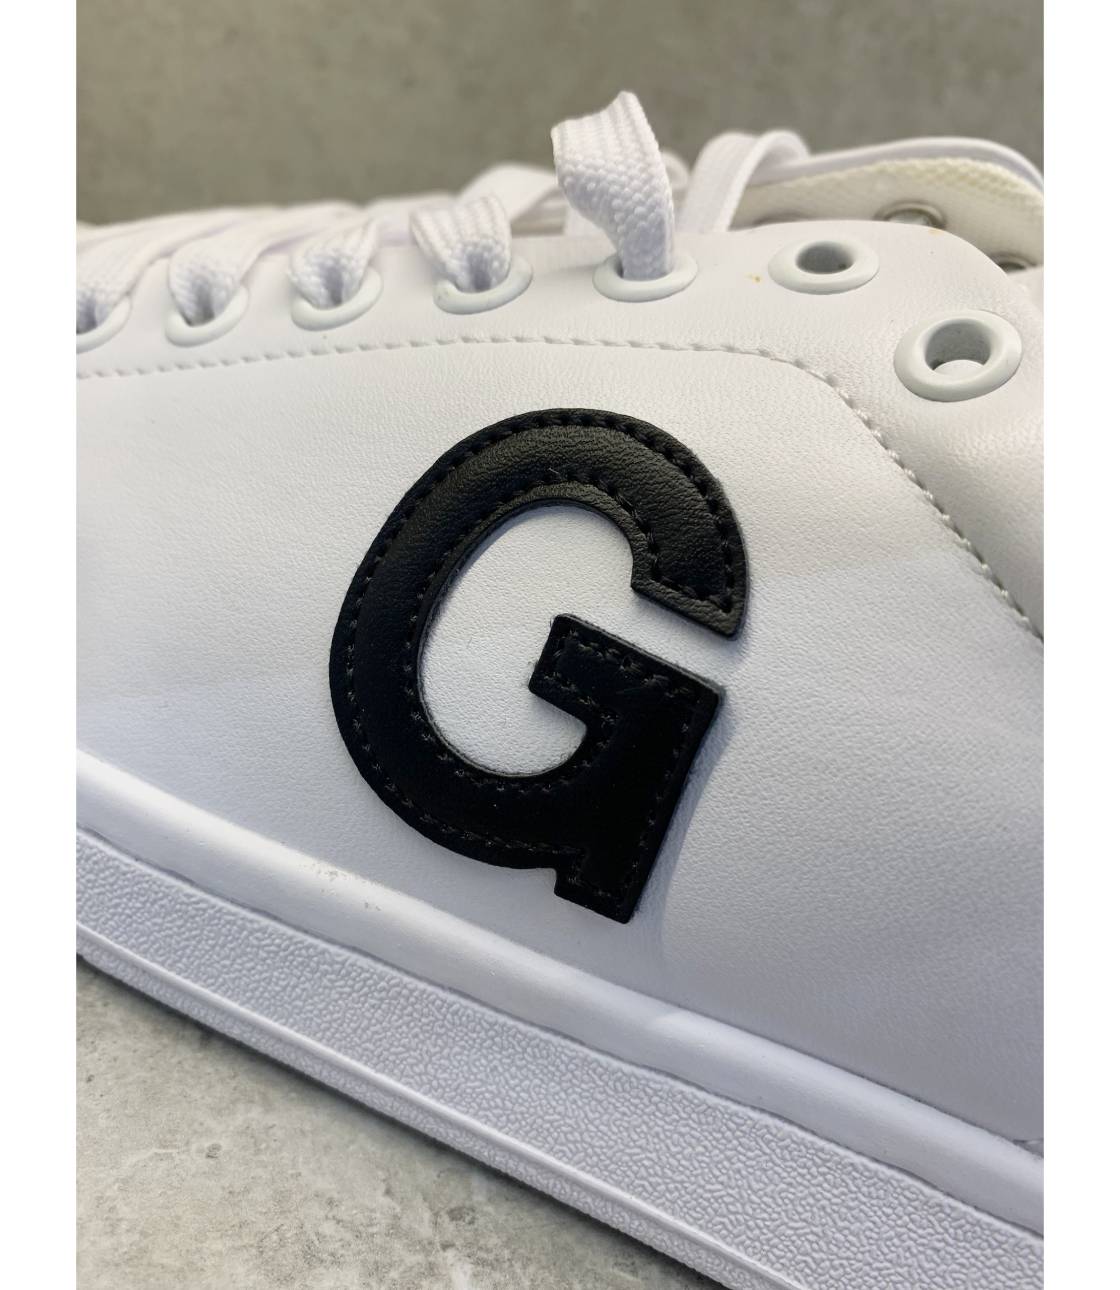 Giày Sneakers Guess 10